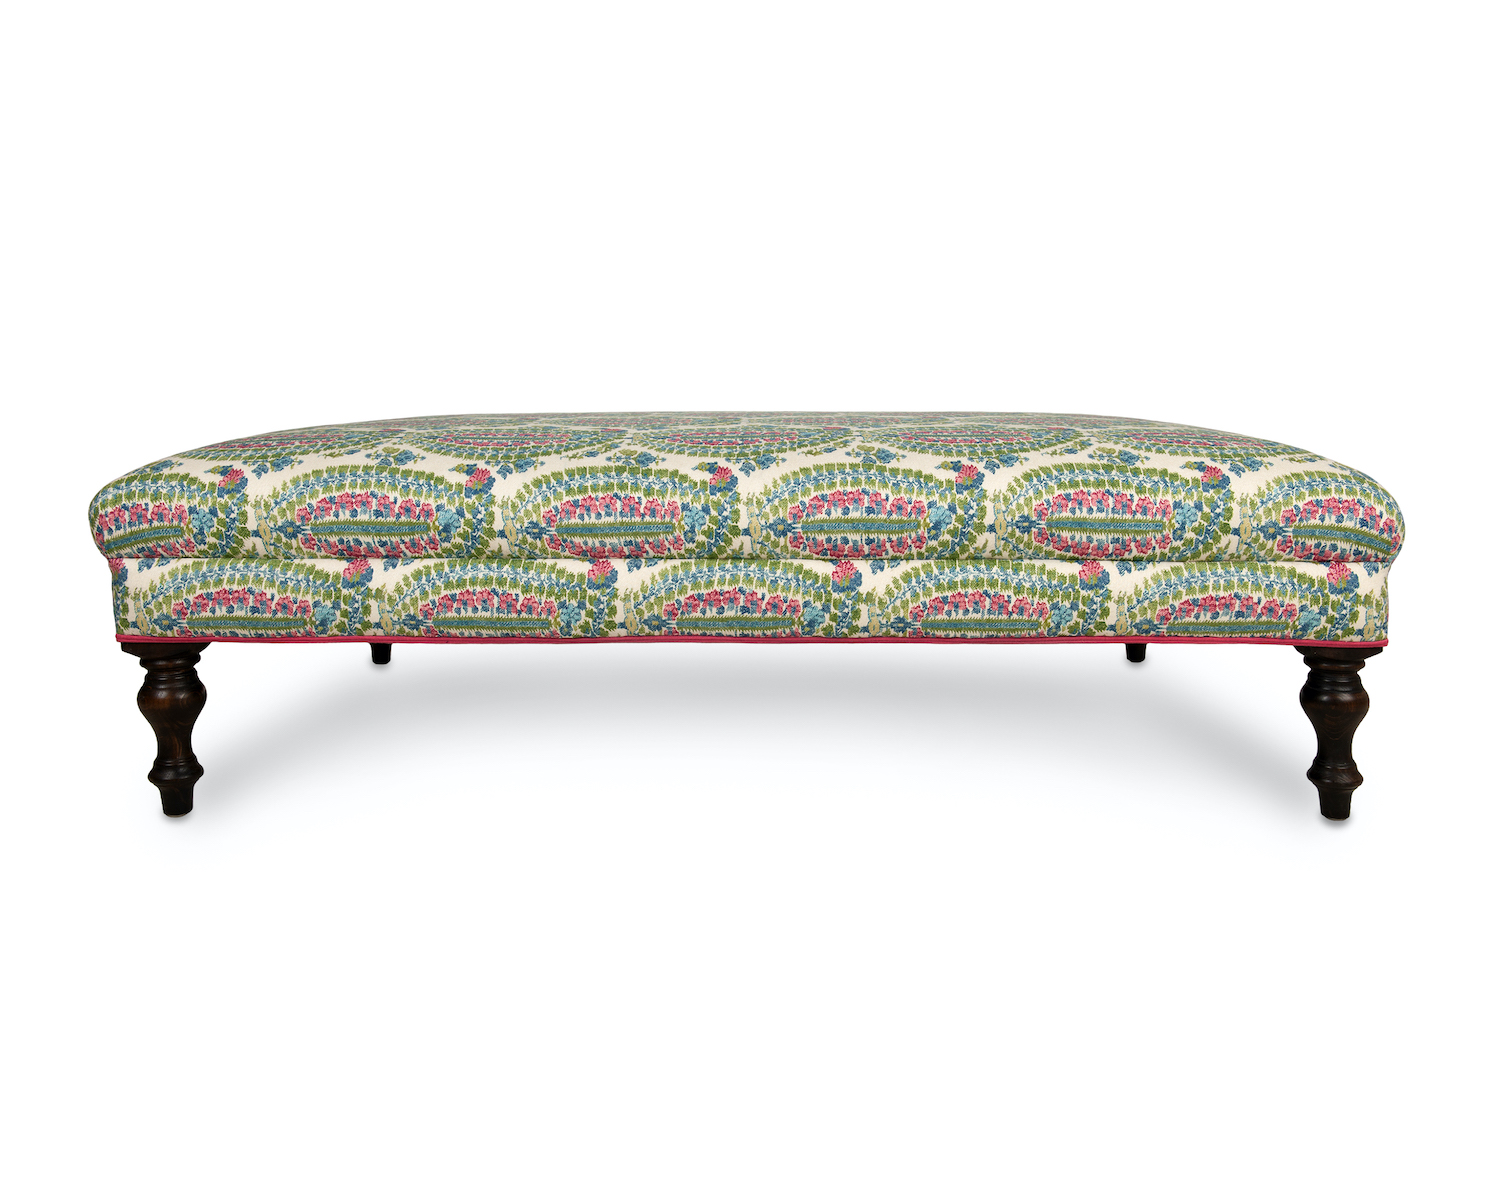 Substanial, Waisted  Footstool with Pink Double-Piping and Turned Legs